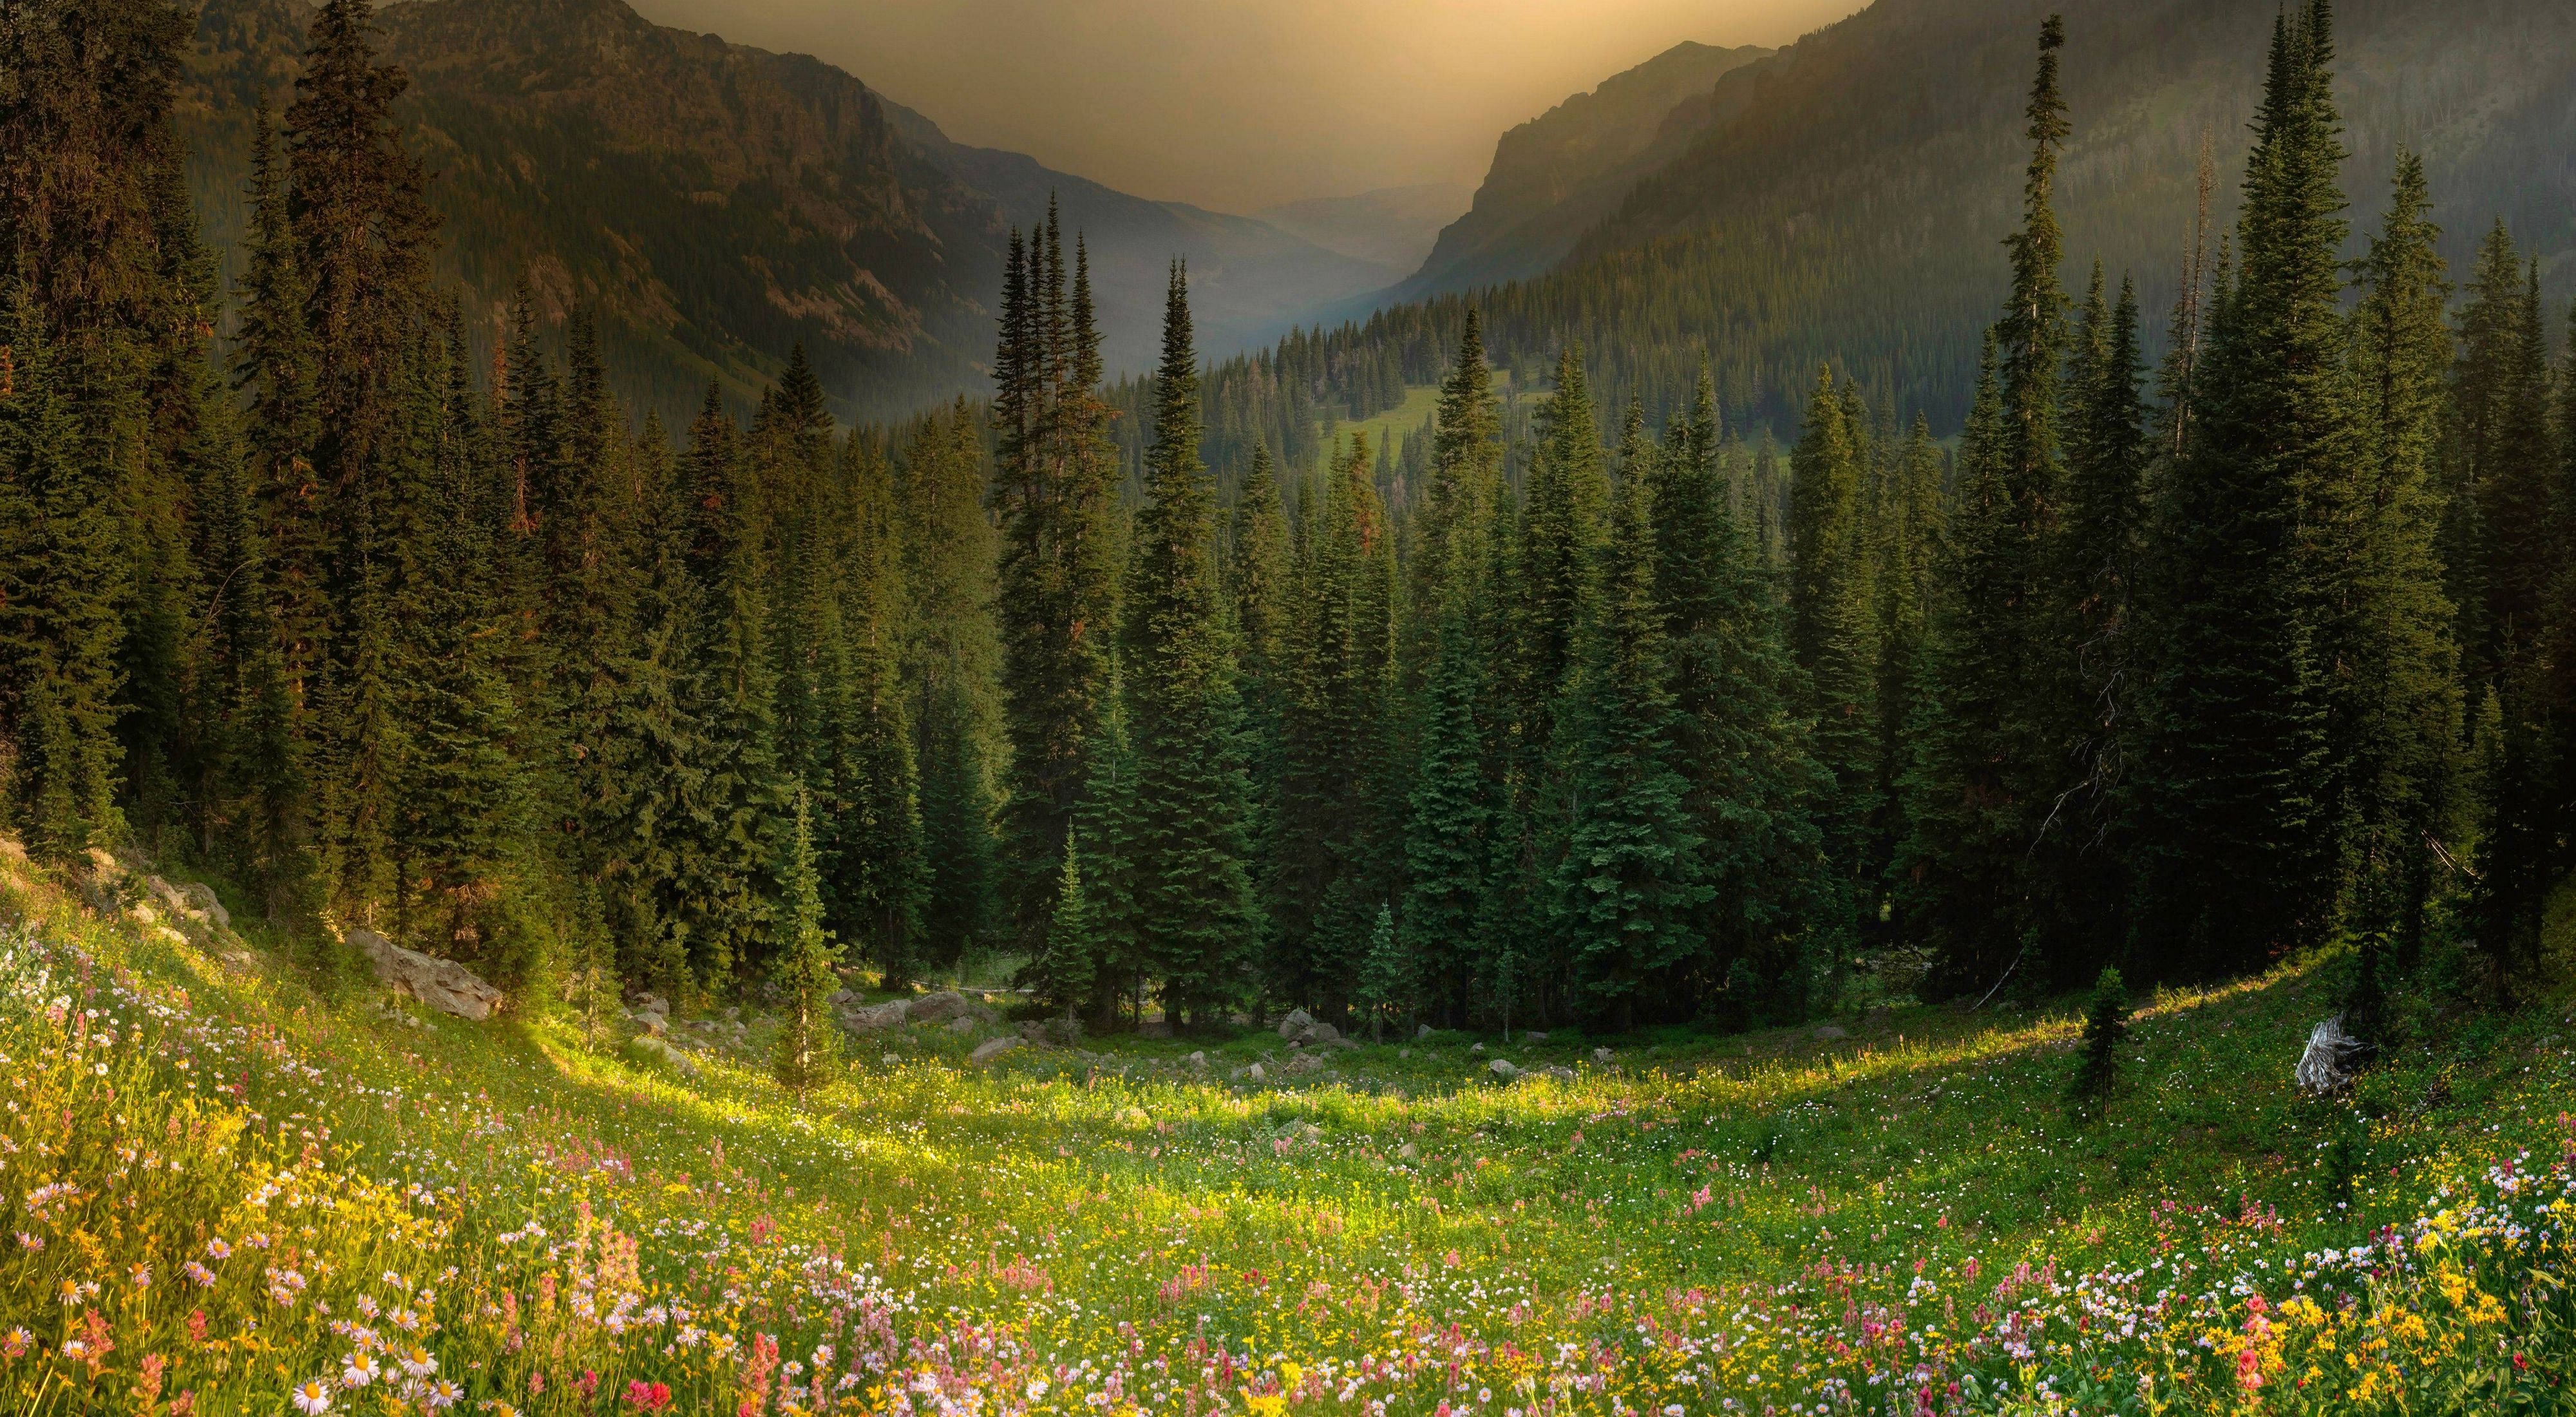 An alpine meadow with lush wildflowers in the foreground, trees in the middle background, and smoke-filled sky in the distance in Montana's Gallatin Mountains.